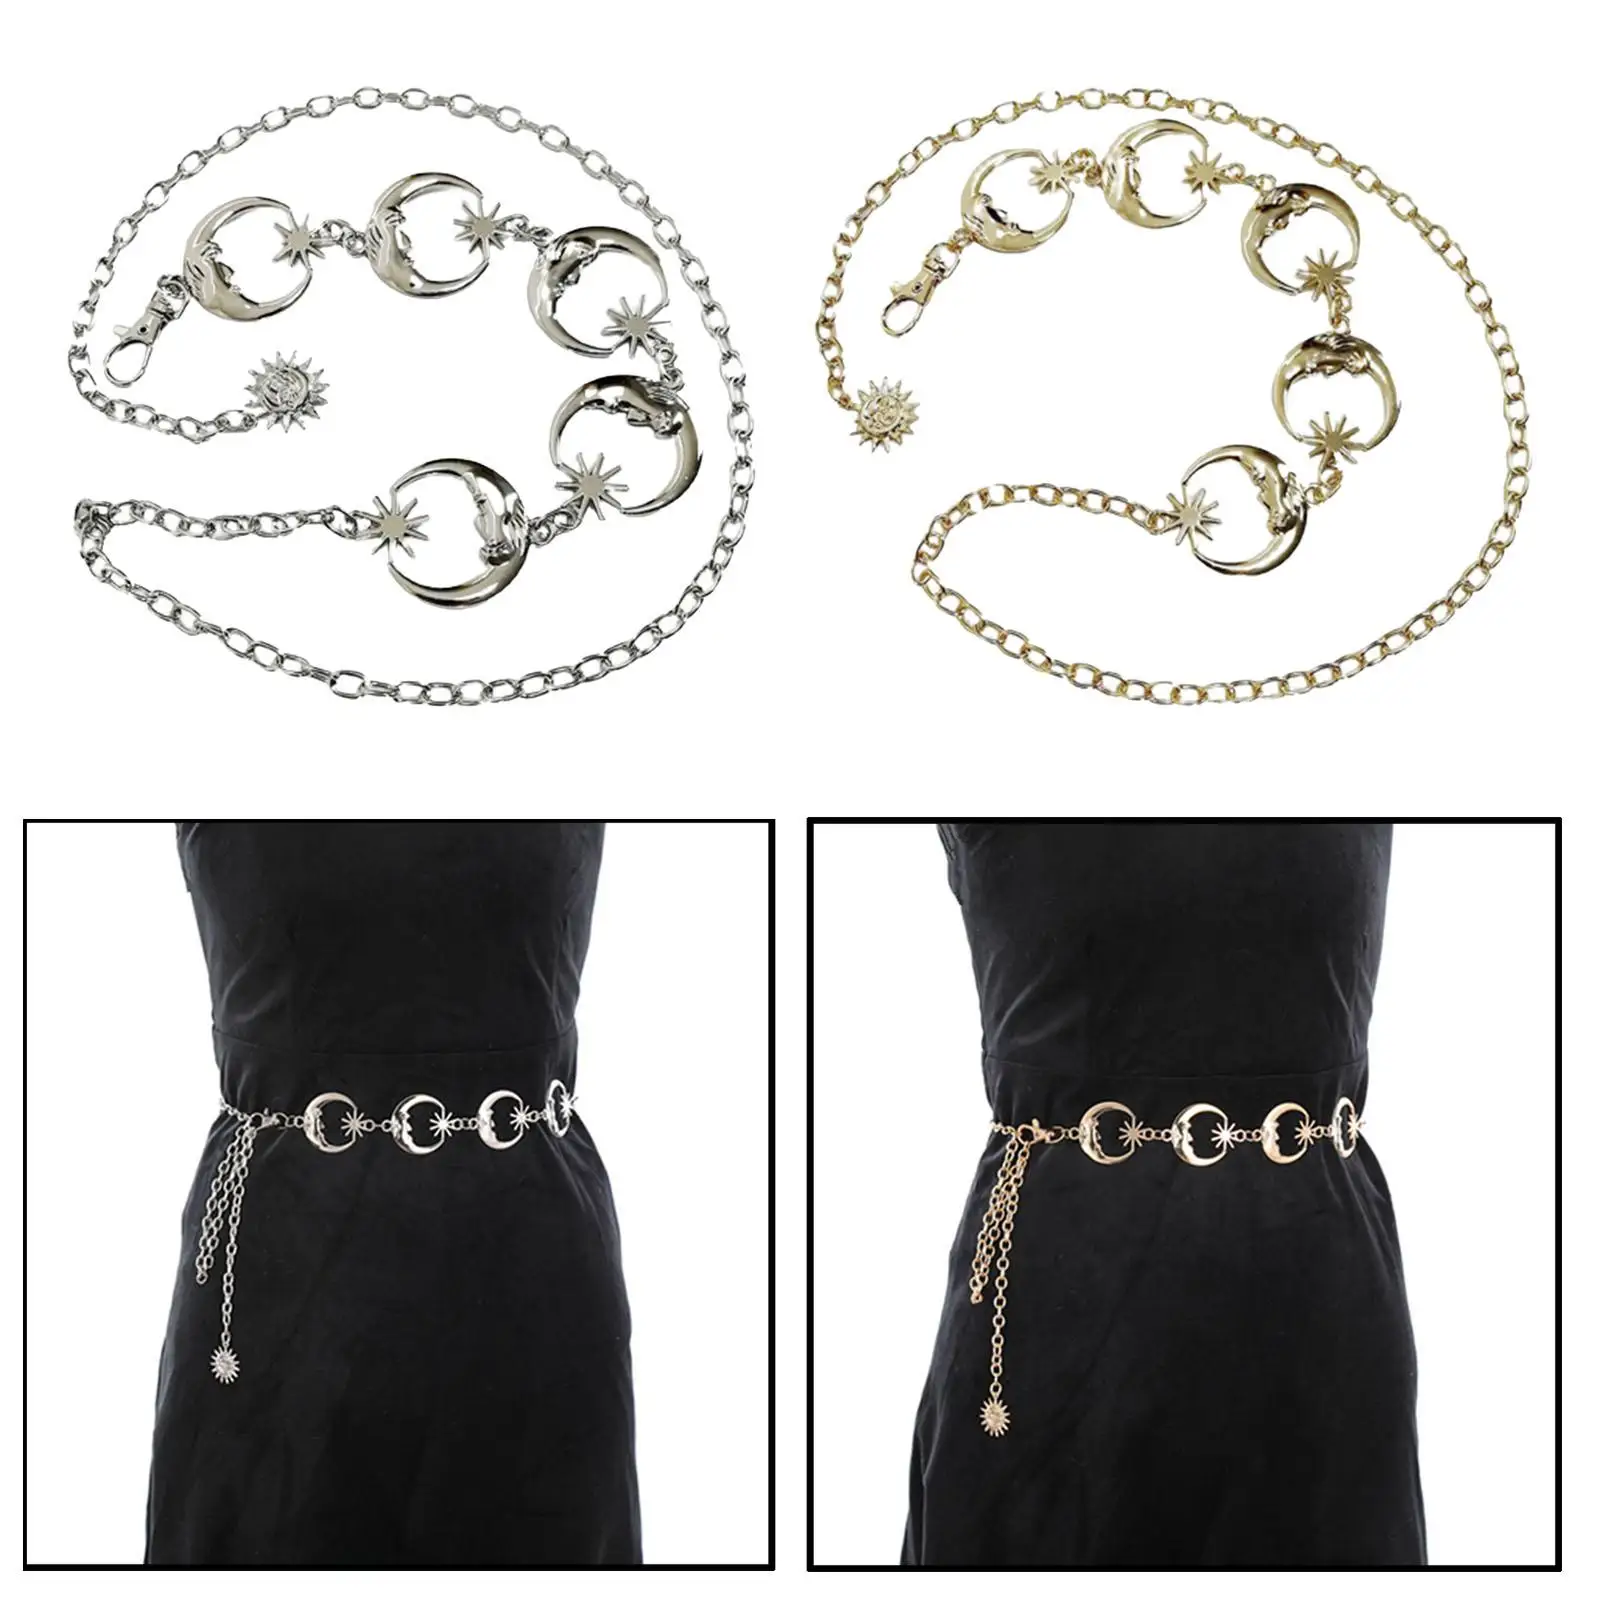 Fashion Ladies Moon Star Pendant Body Chain Belt, Glossy Surface Comfortable to Wear